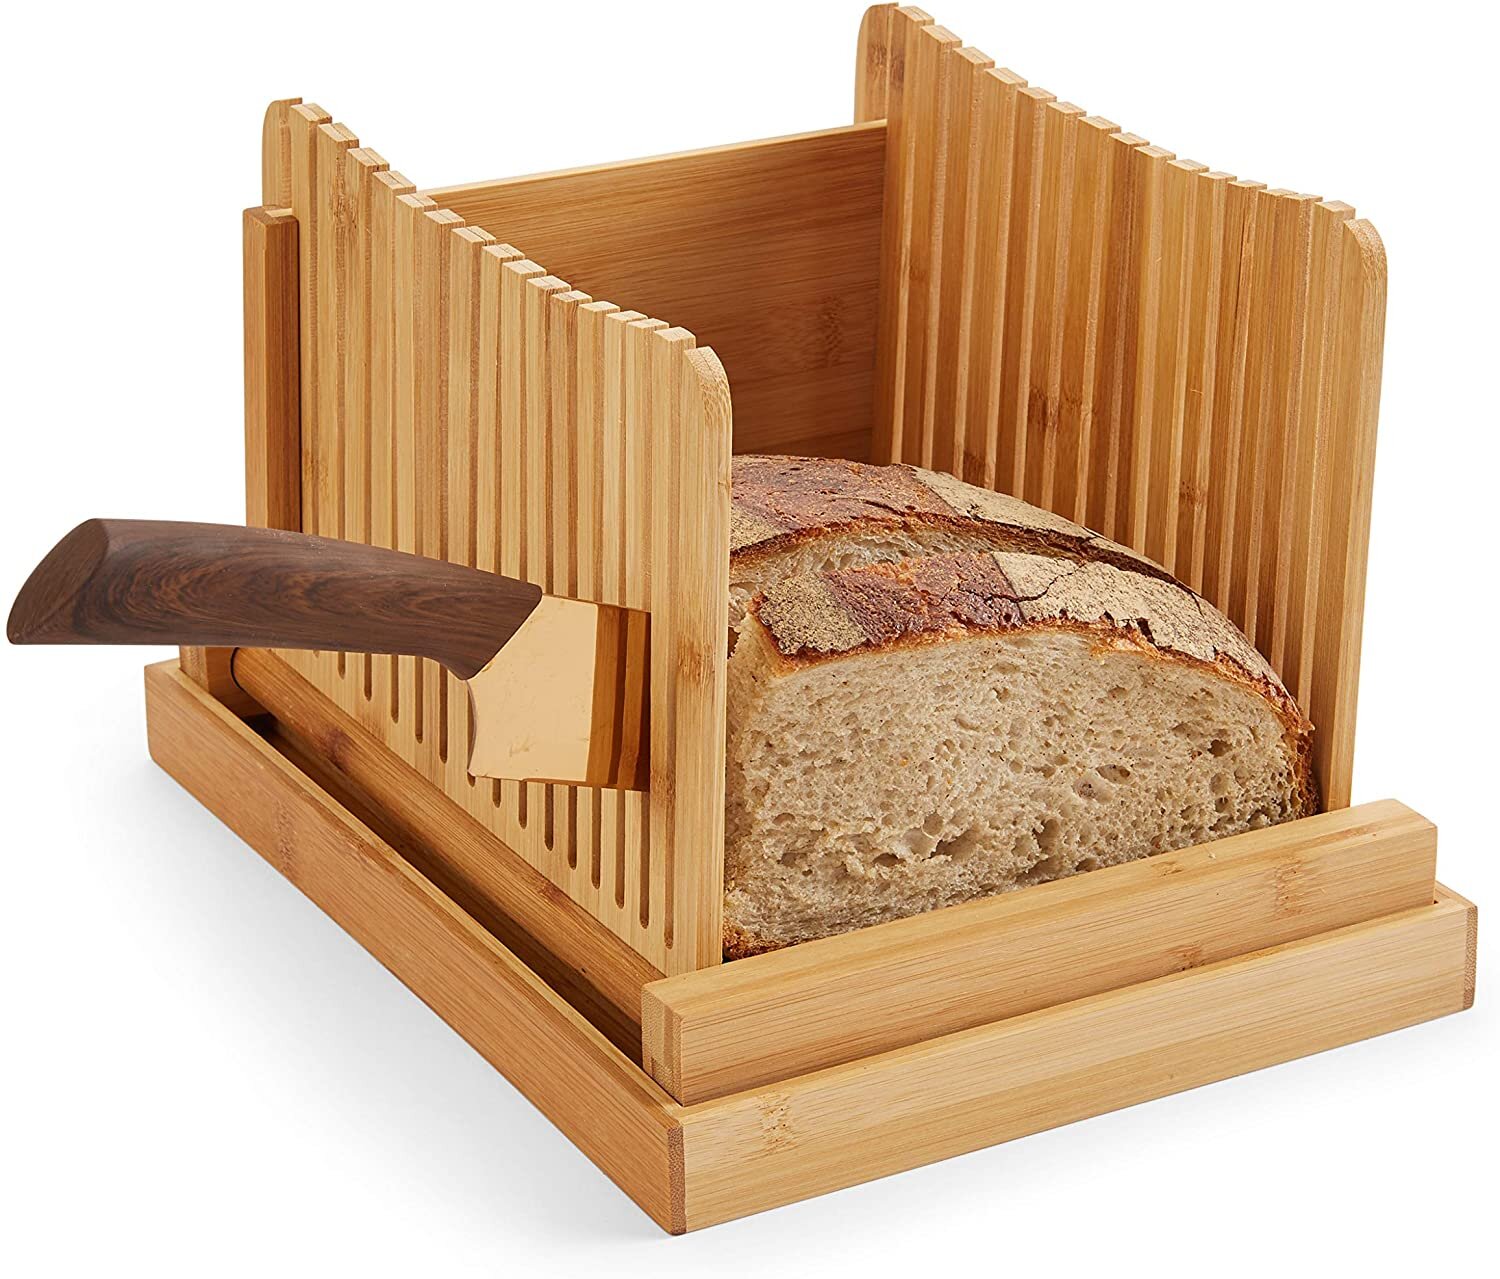 Bamboo Bread Slicer - Foldable, Adjustable Knife Guide and Board for Even  Loaf Cutting - Food Preparation Tool for Home Bakers by Classic Cuisine